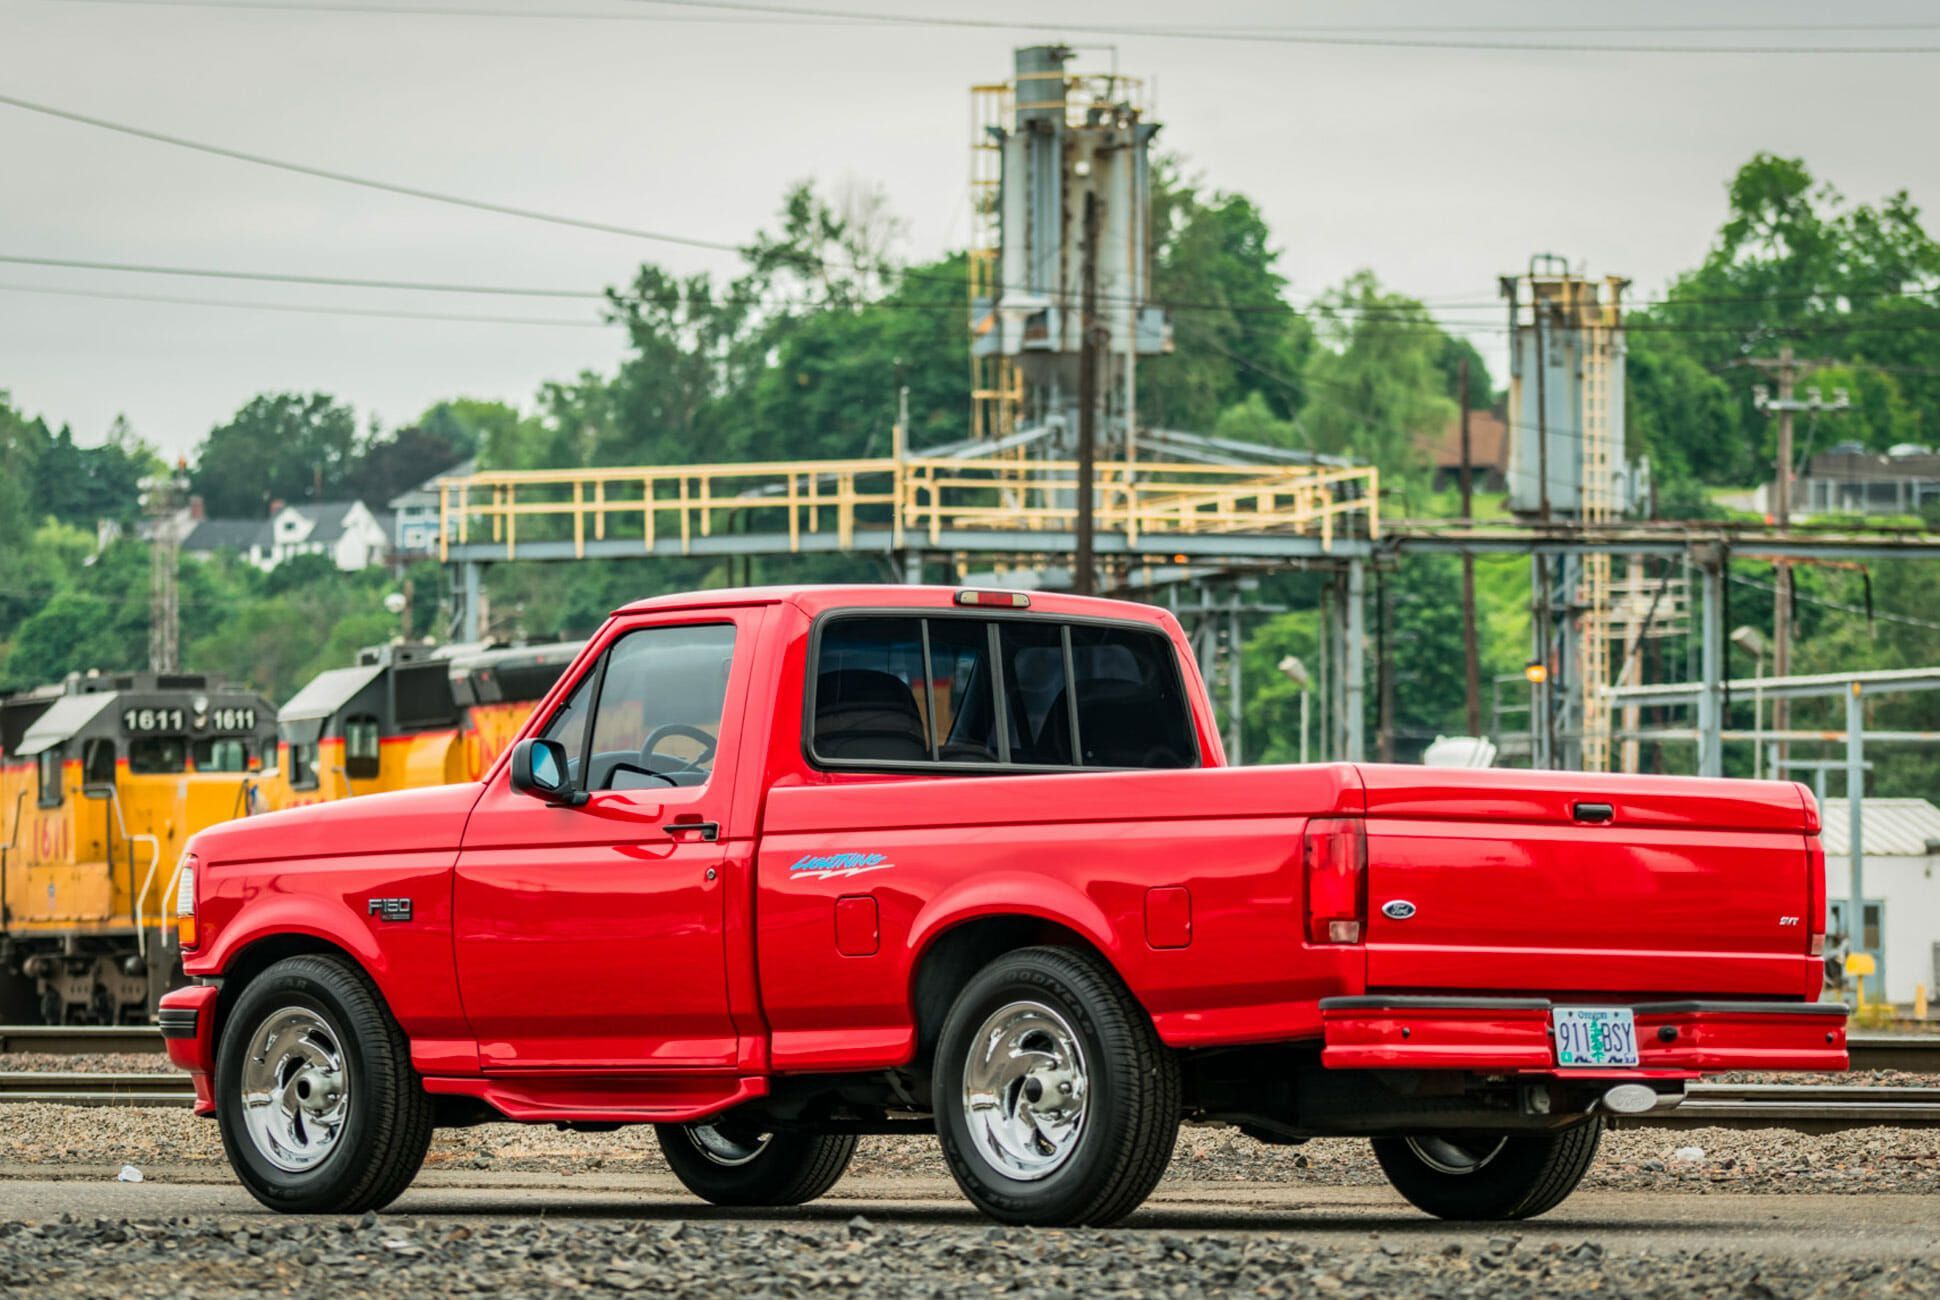 Red Ford F-150 Lightning outdoors; rear view